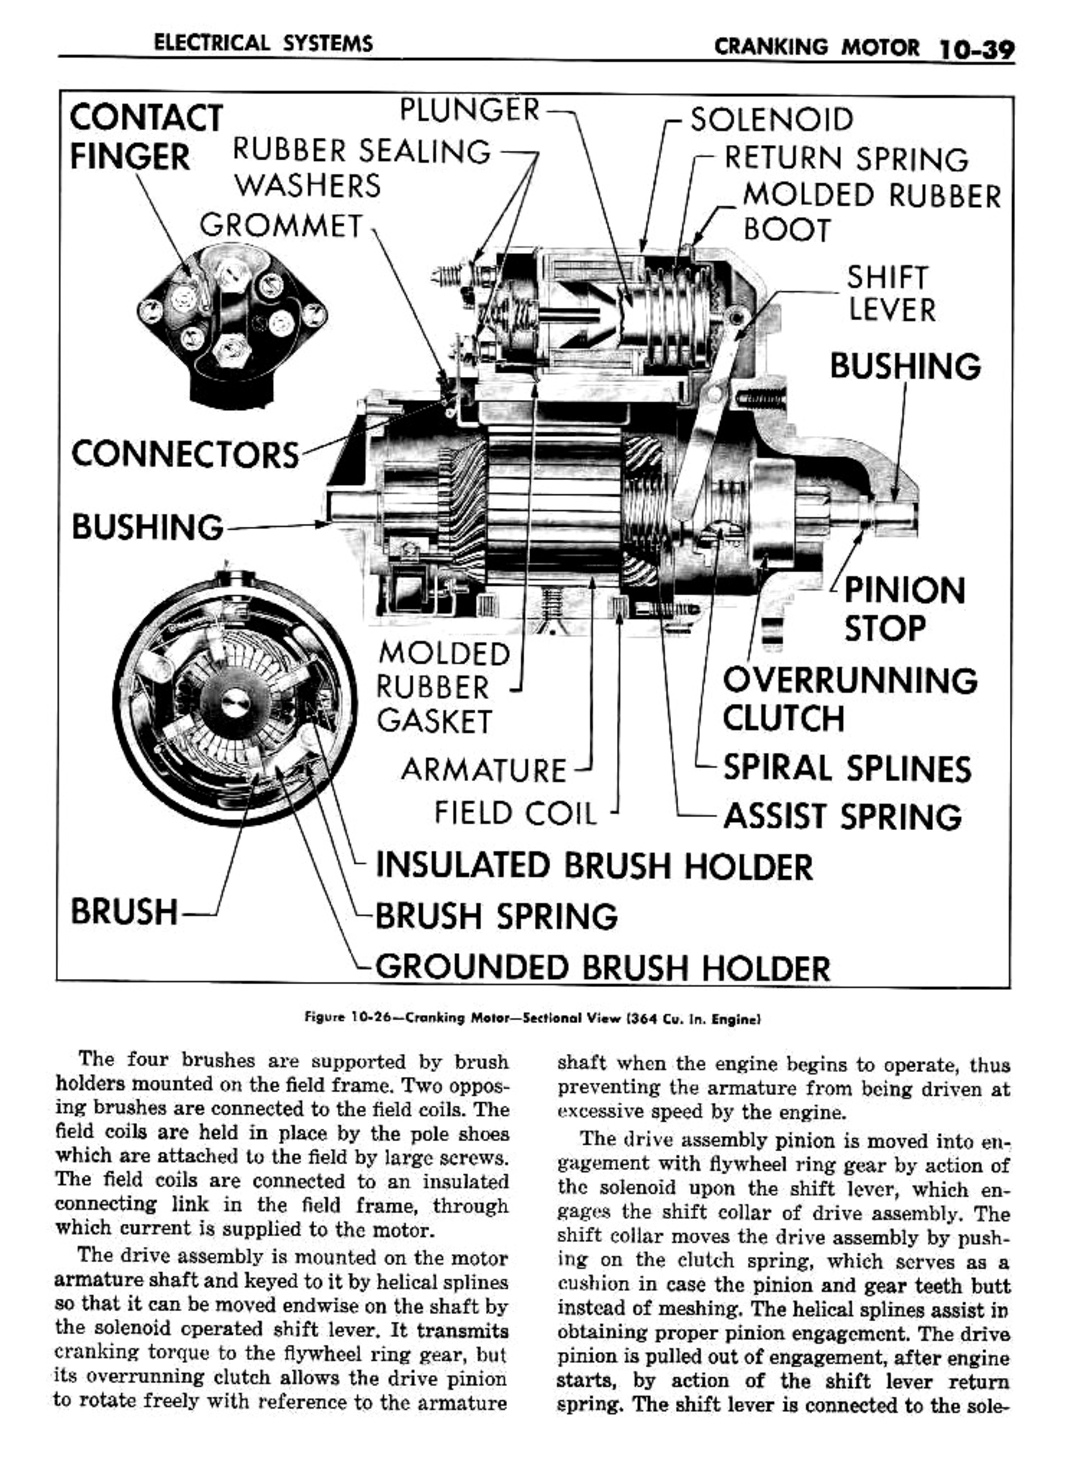 n_11 1960 Buick Shop Manual - Electrical Systems-039-039.jpg